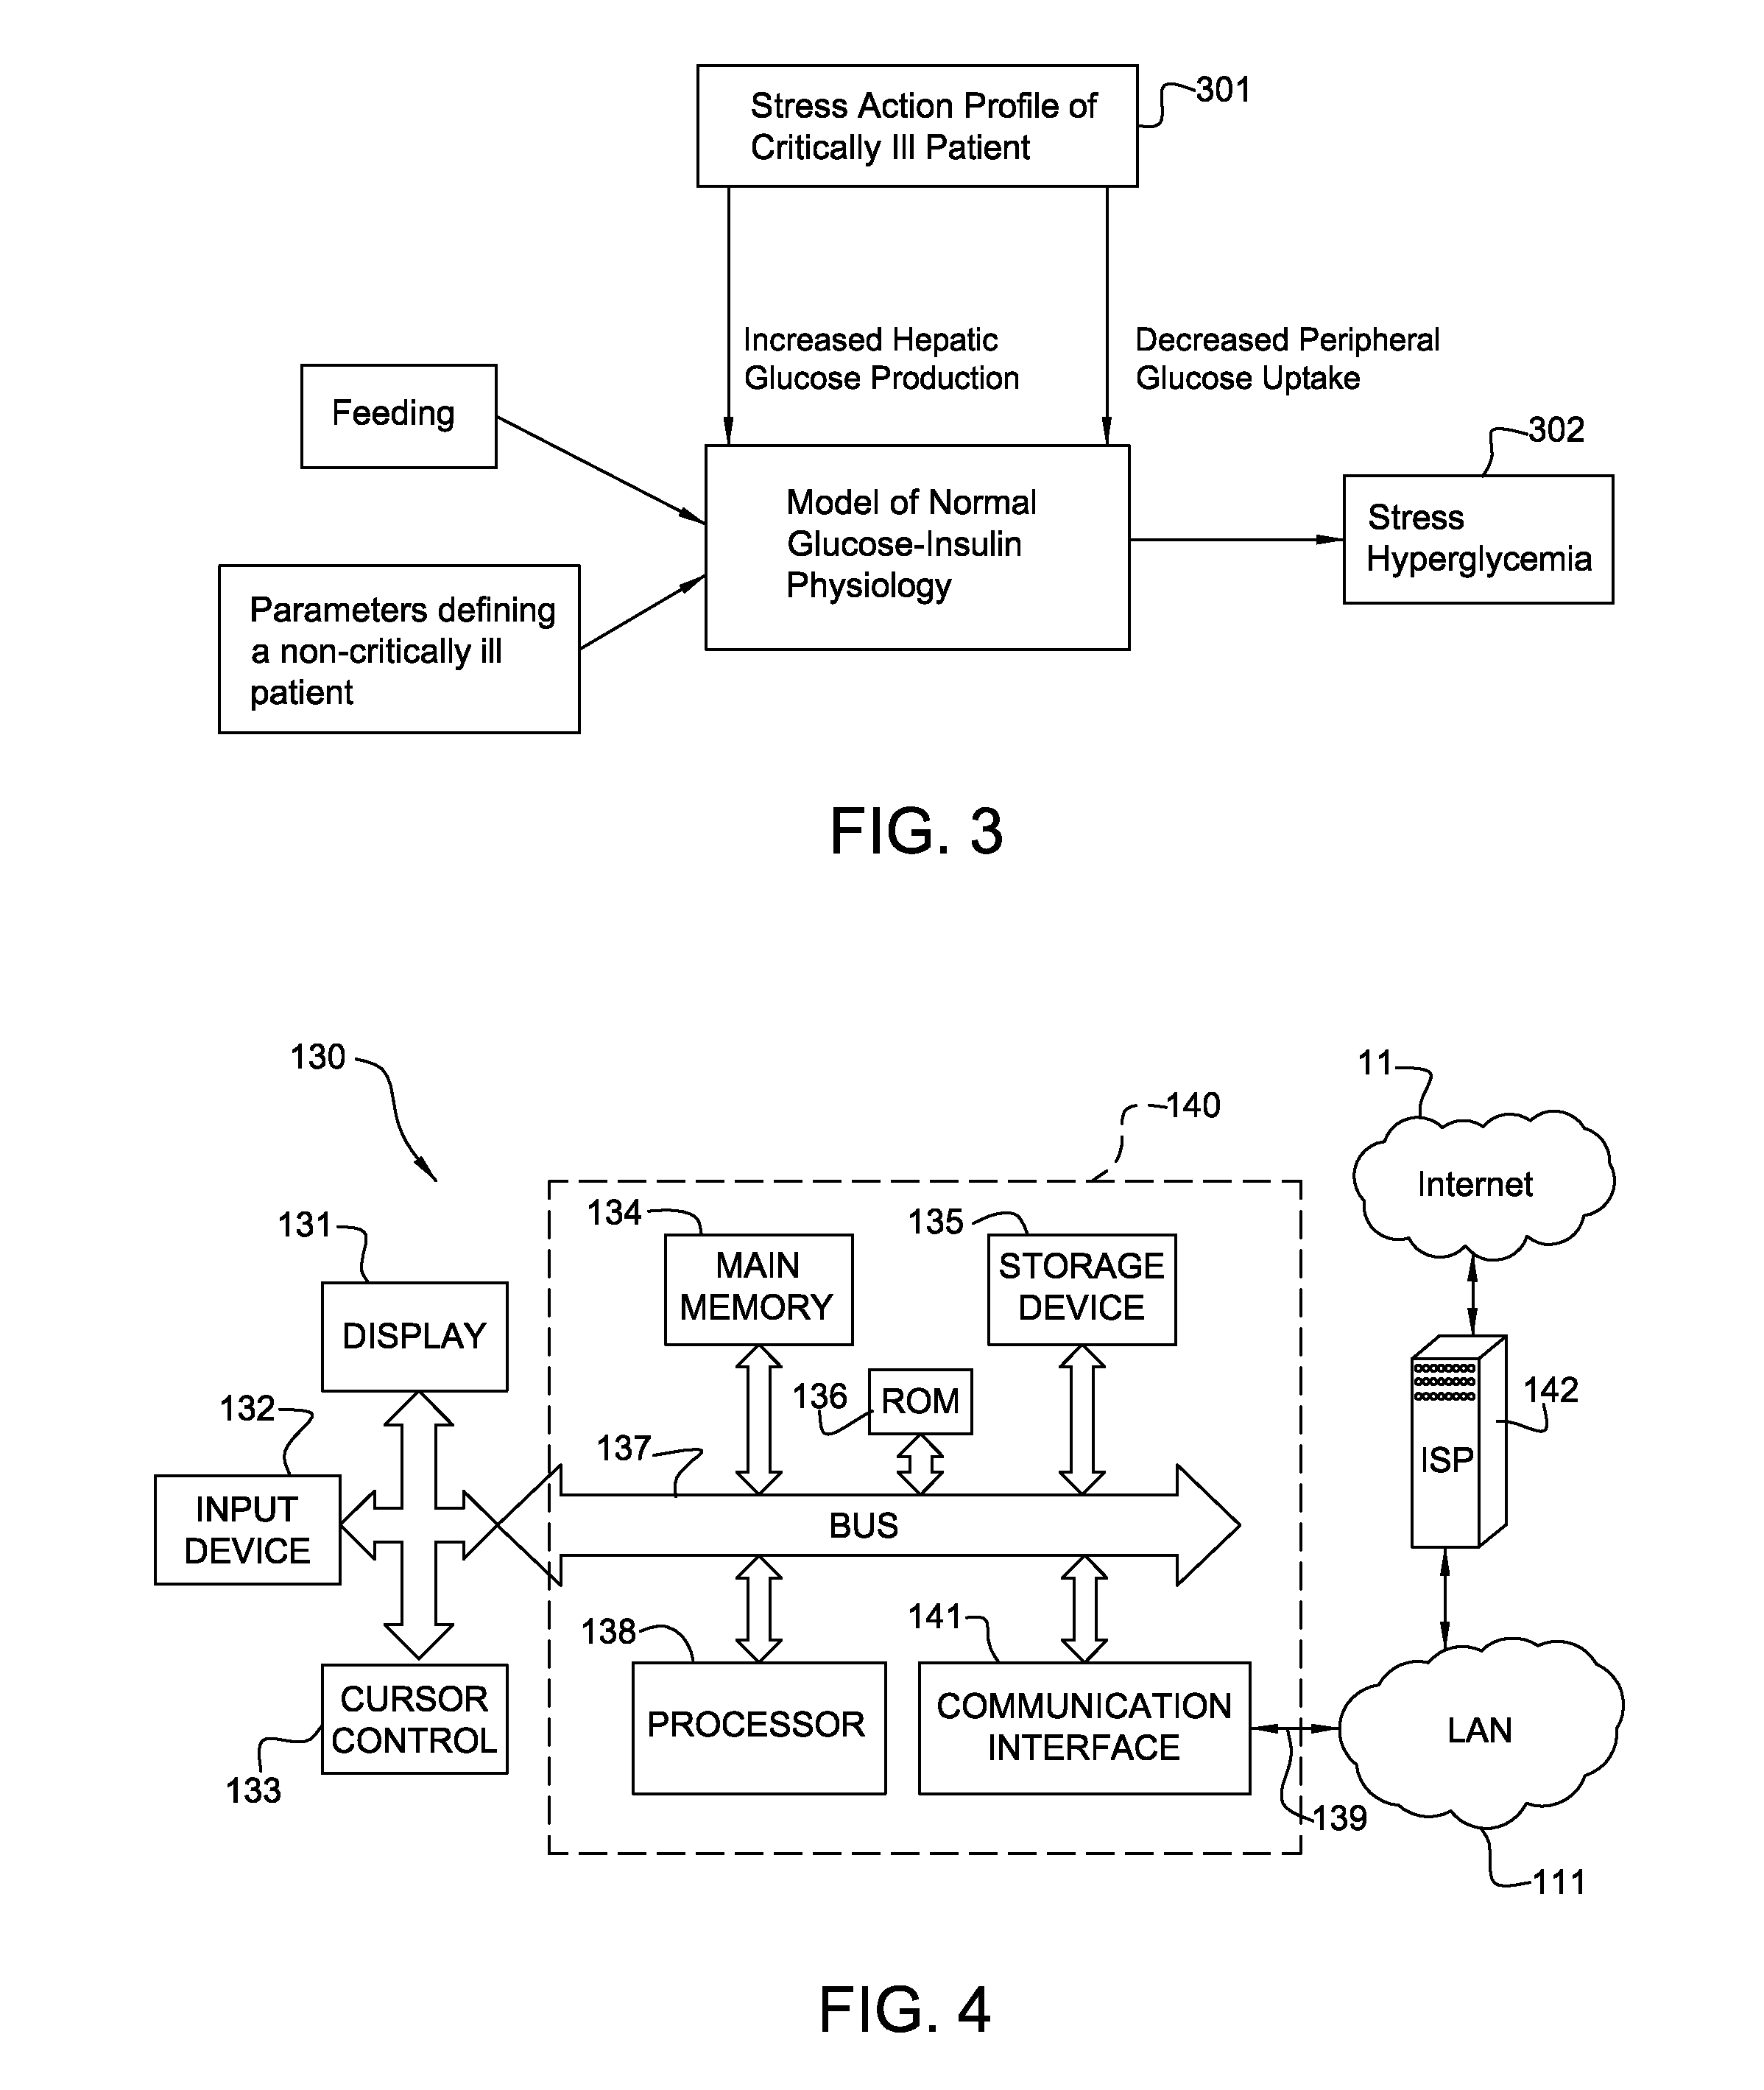 Computer Simulation for Testing and Monitoring of Treatment Strategies for Stress Hyperglycemia